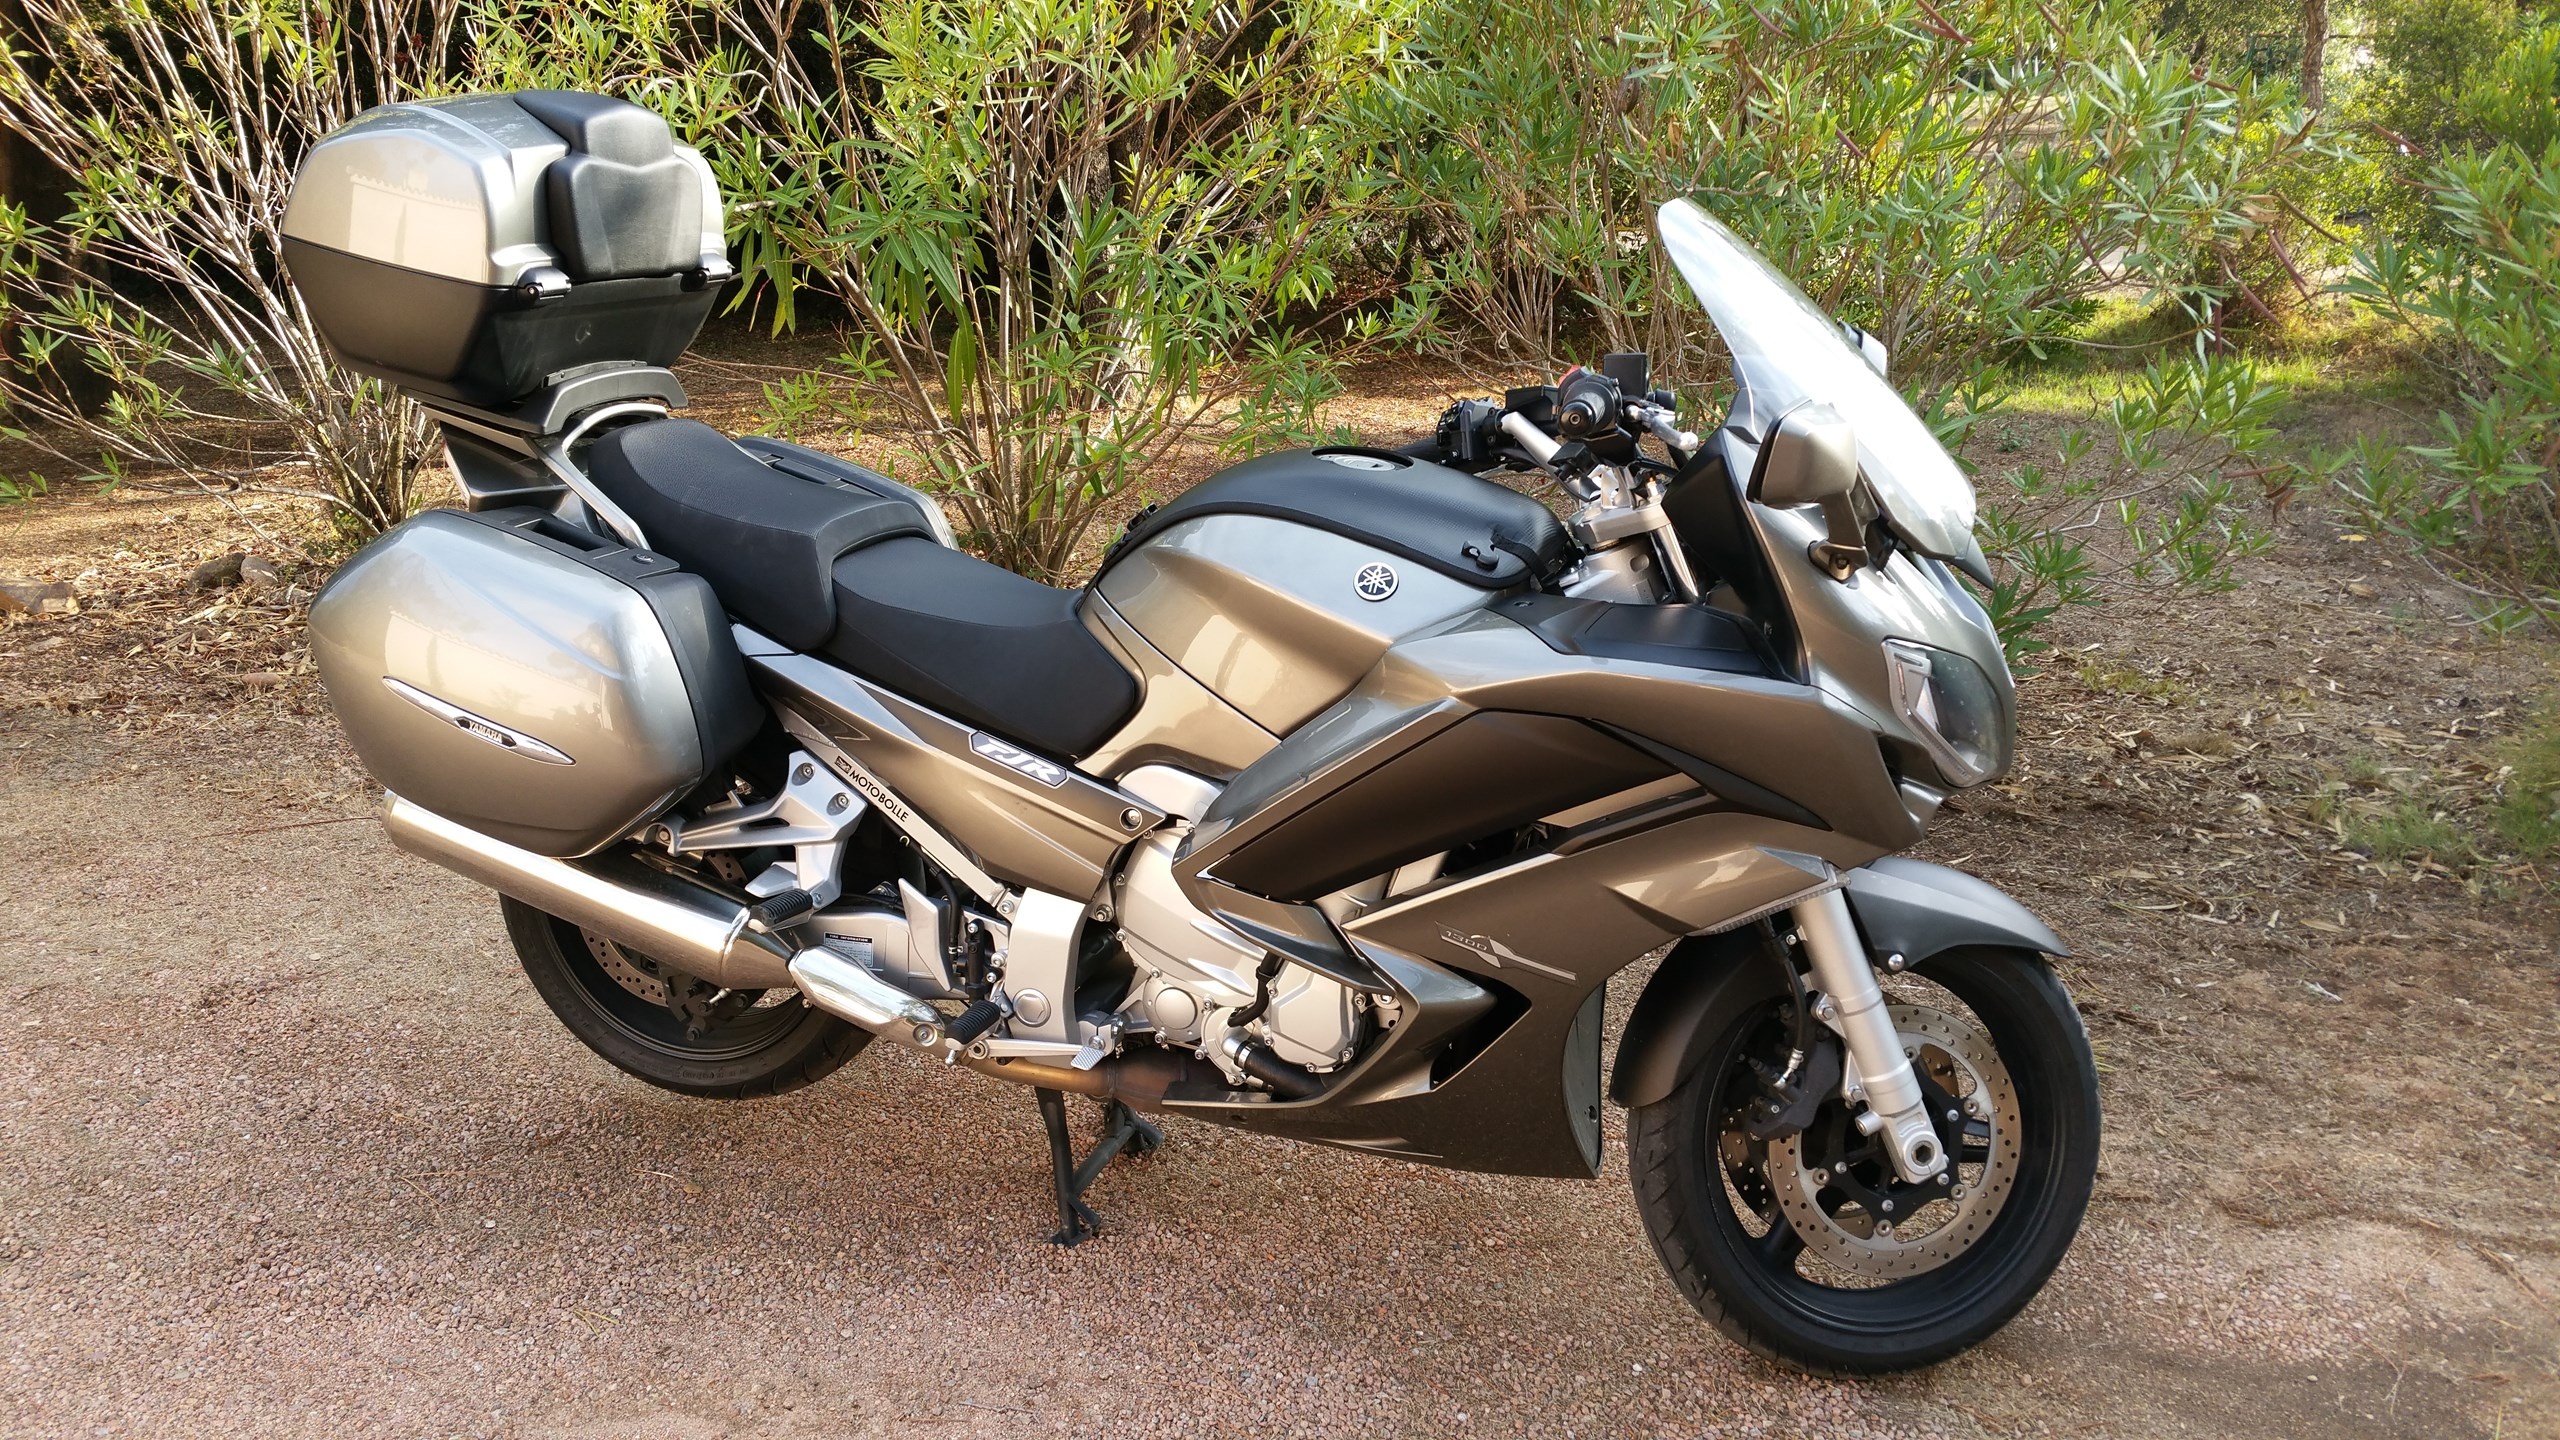 Yamaha FJR1300, Buy new or used, Motoscout24, Motorcycle marketplace, 2560x1440 HD Desktop